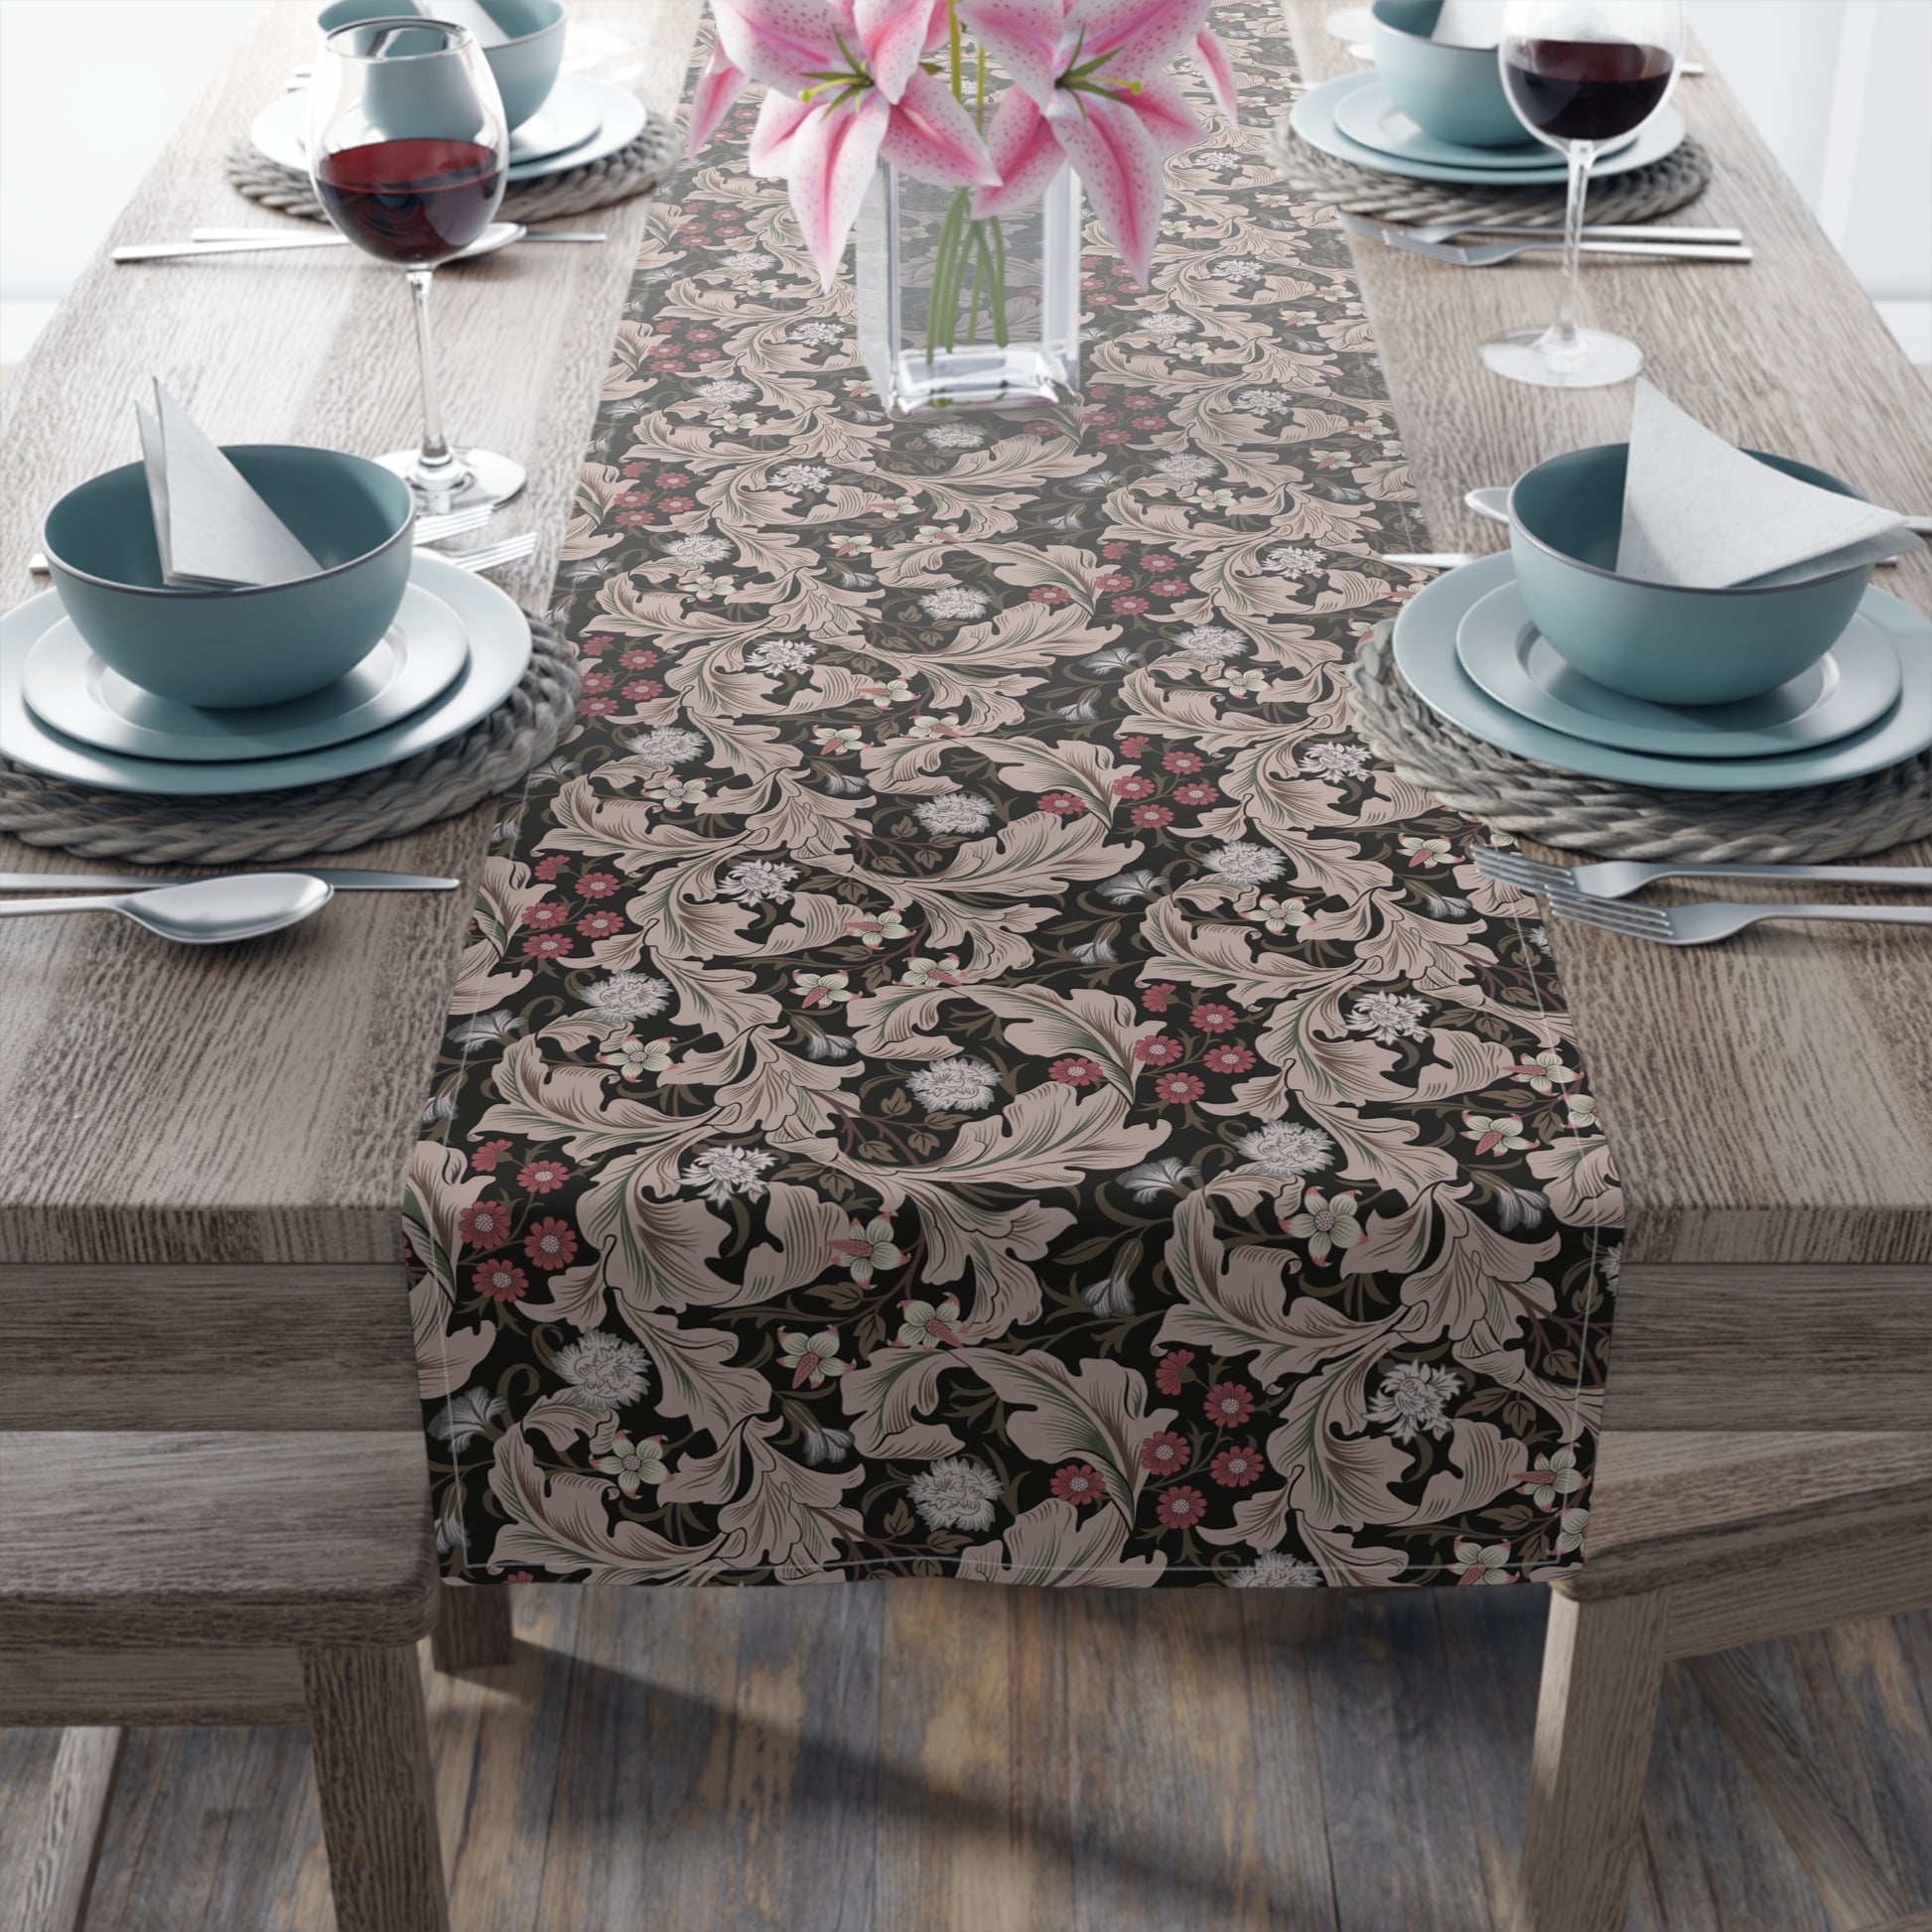 william-morris-co-table-runner-leicester-collection-mocha-1